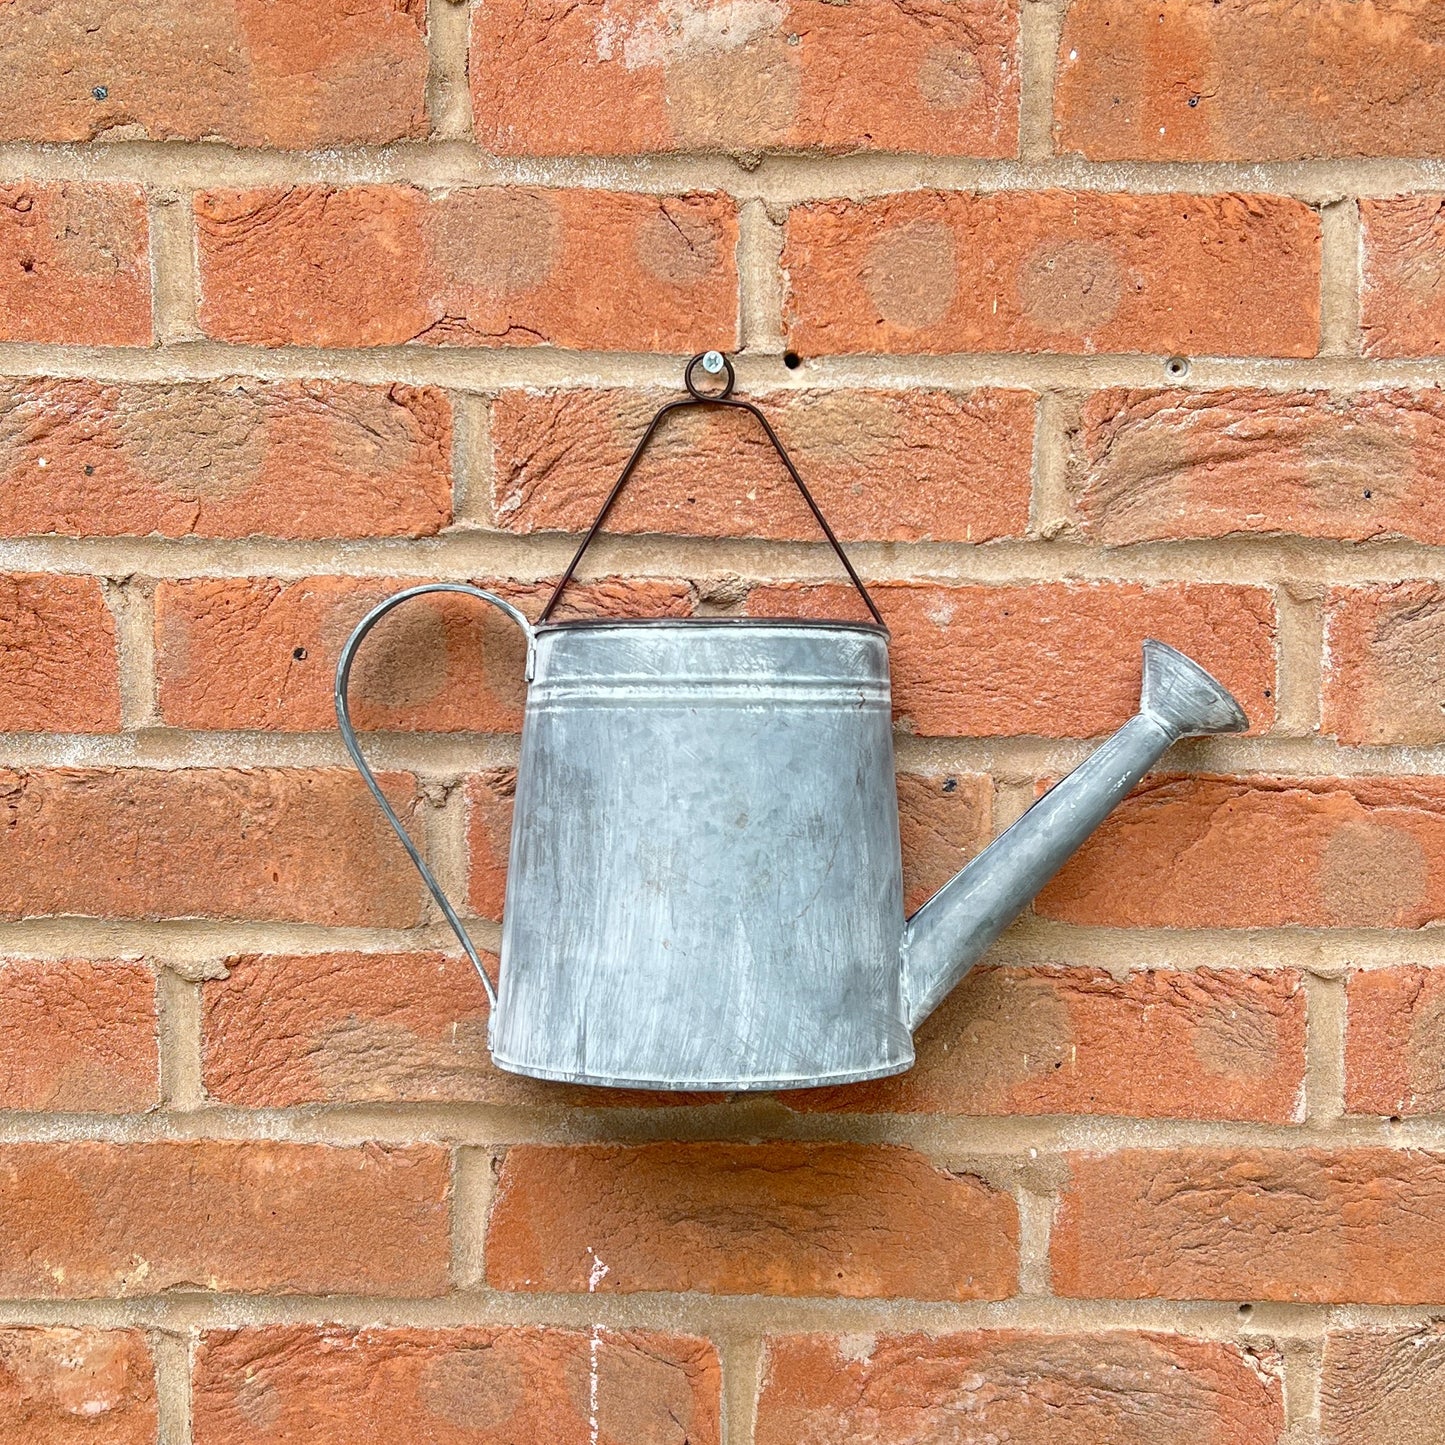 Set of 3 Watering Can Wall Planters